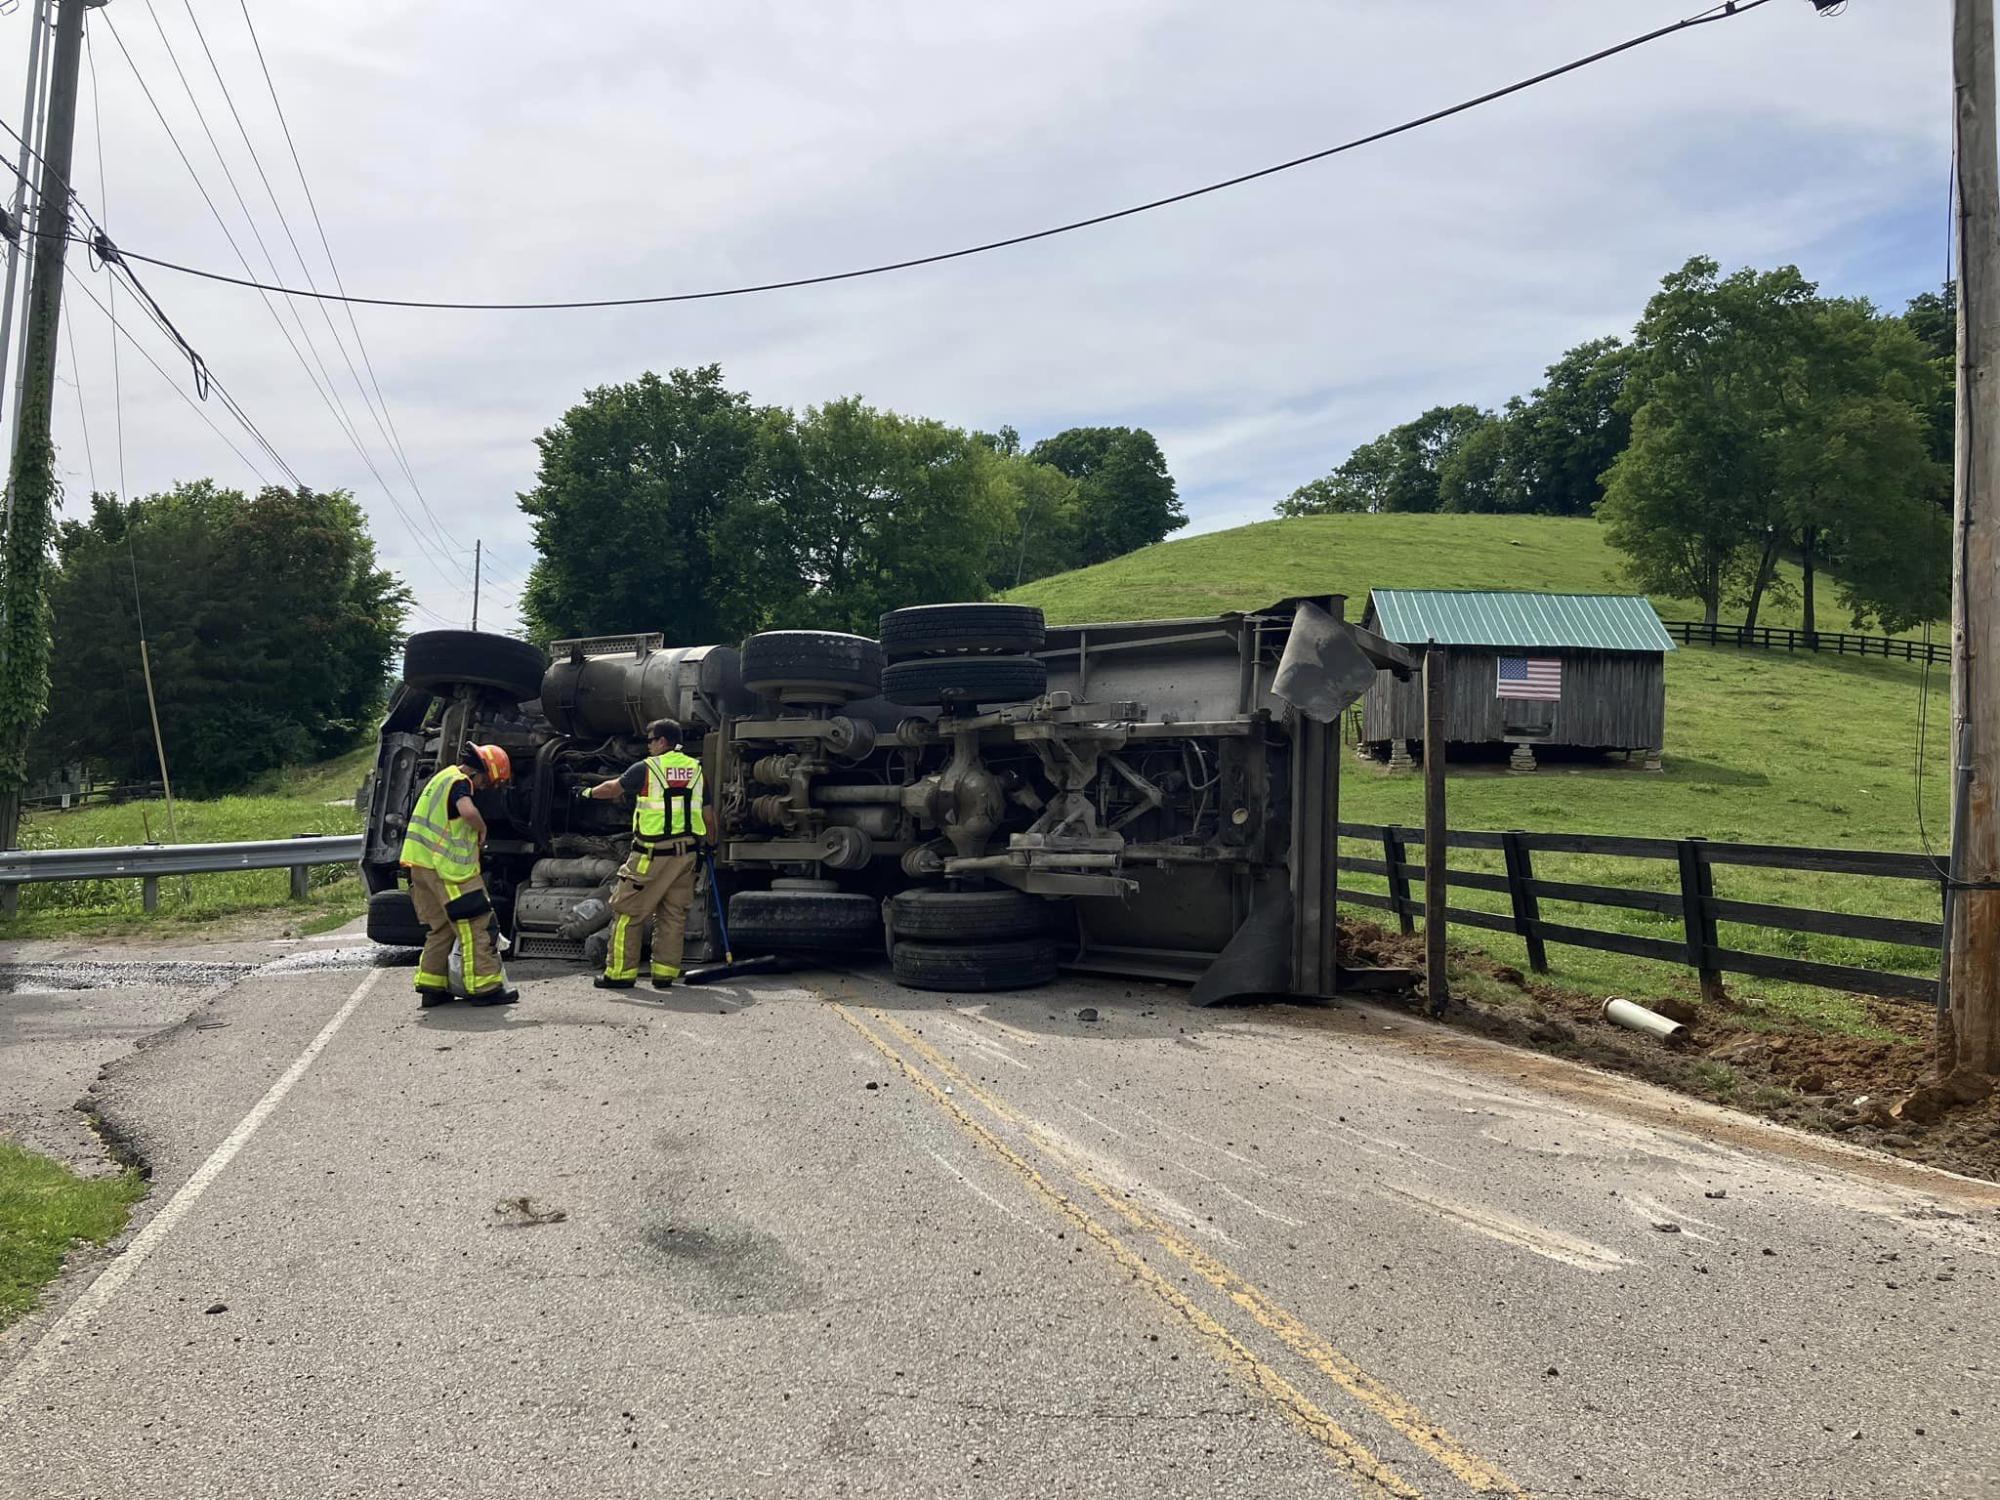 Overturned truck - Photo Credit: Williamson County Fire/Rescue